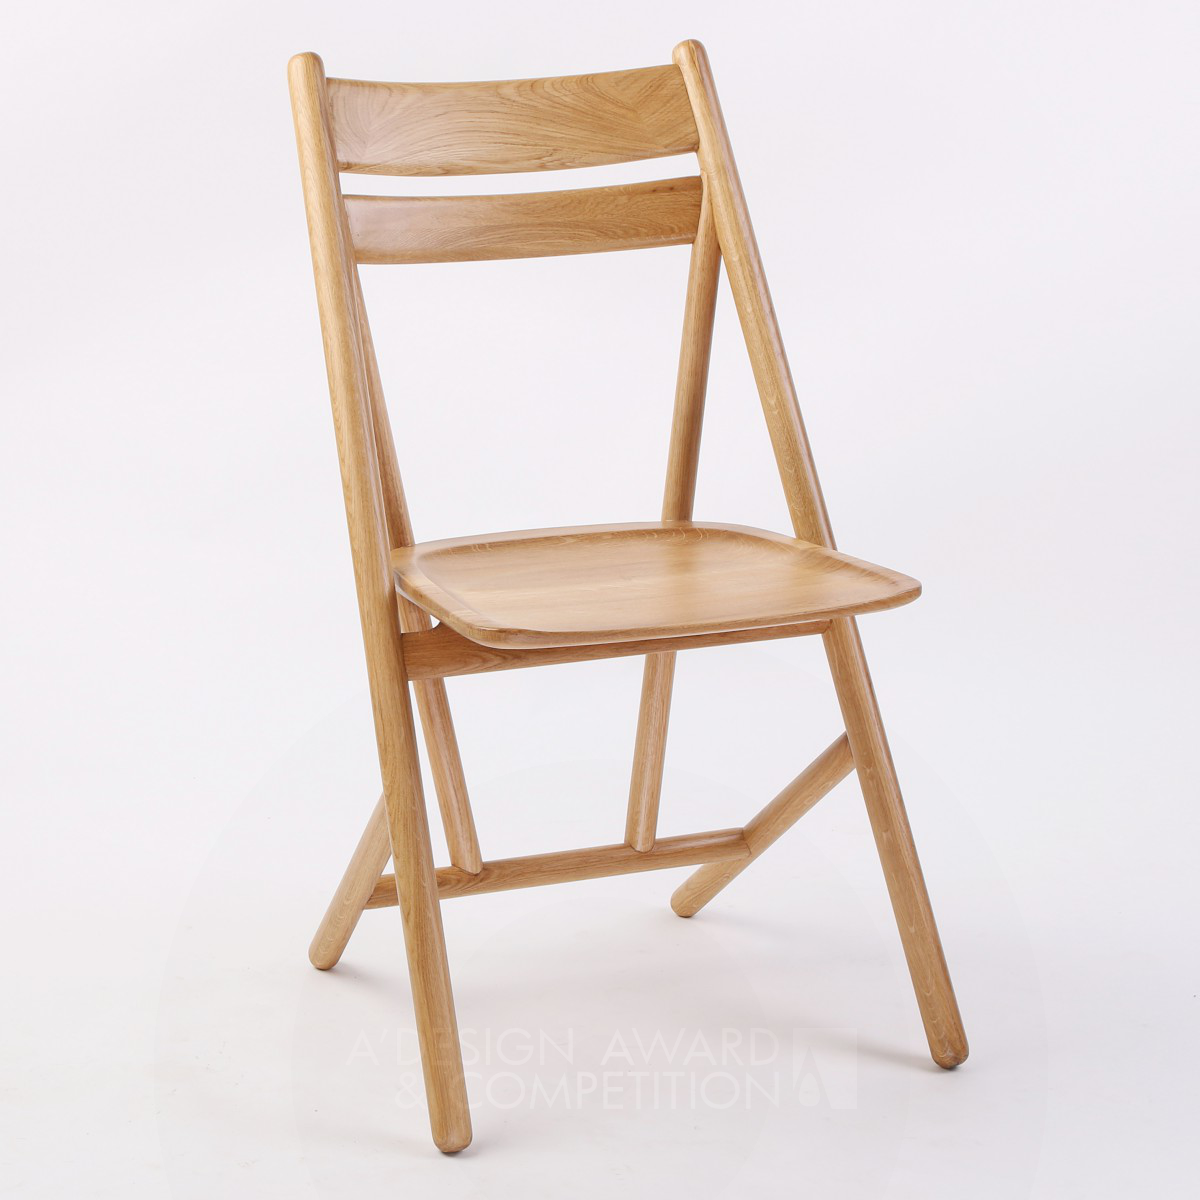 OBLIQUE CHAIR by Quoc Trang Pham